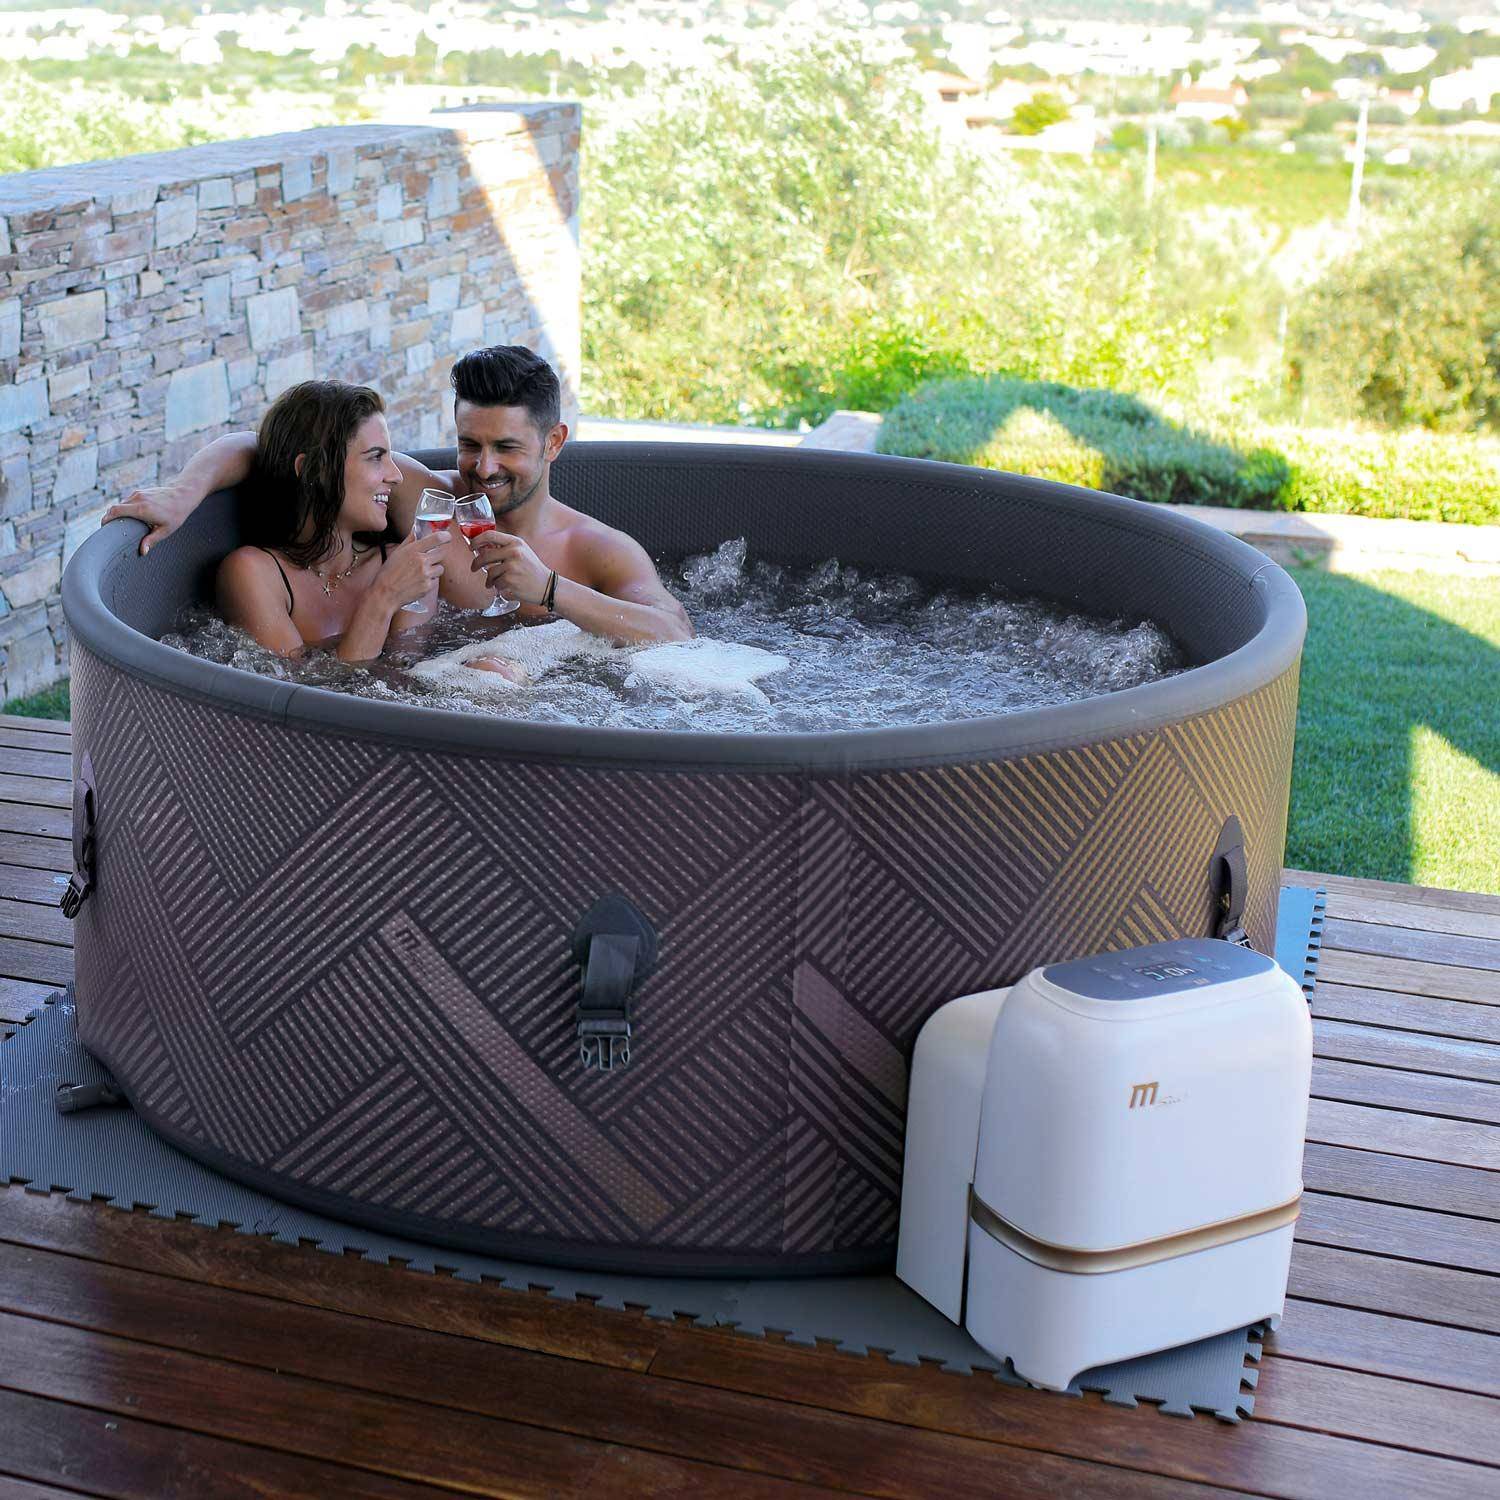  6-person premium round inflatable hot tub MSpa - Ø173cm round 6-person spa, reinforced PVC, pump, heating, filters, cover, floor mat - Mono 6 - Grey Photo1